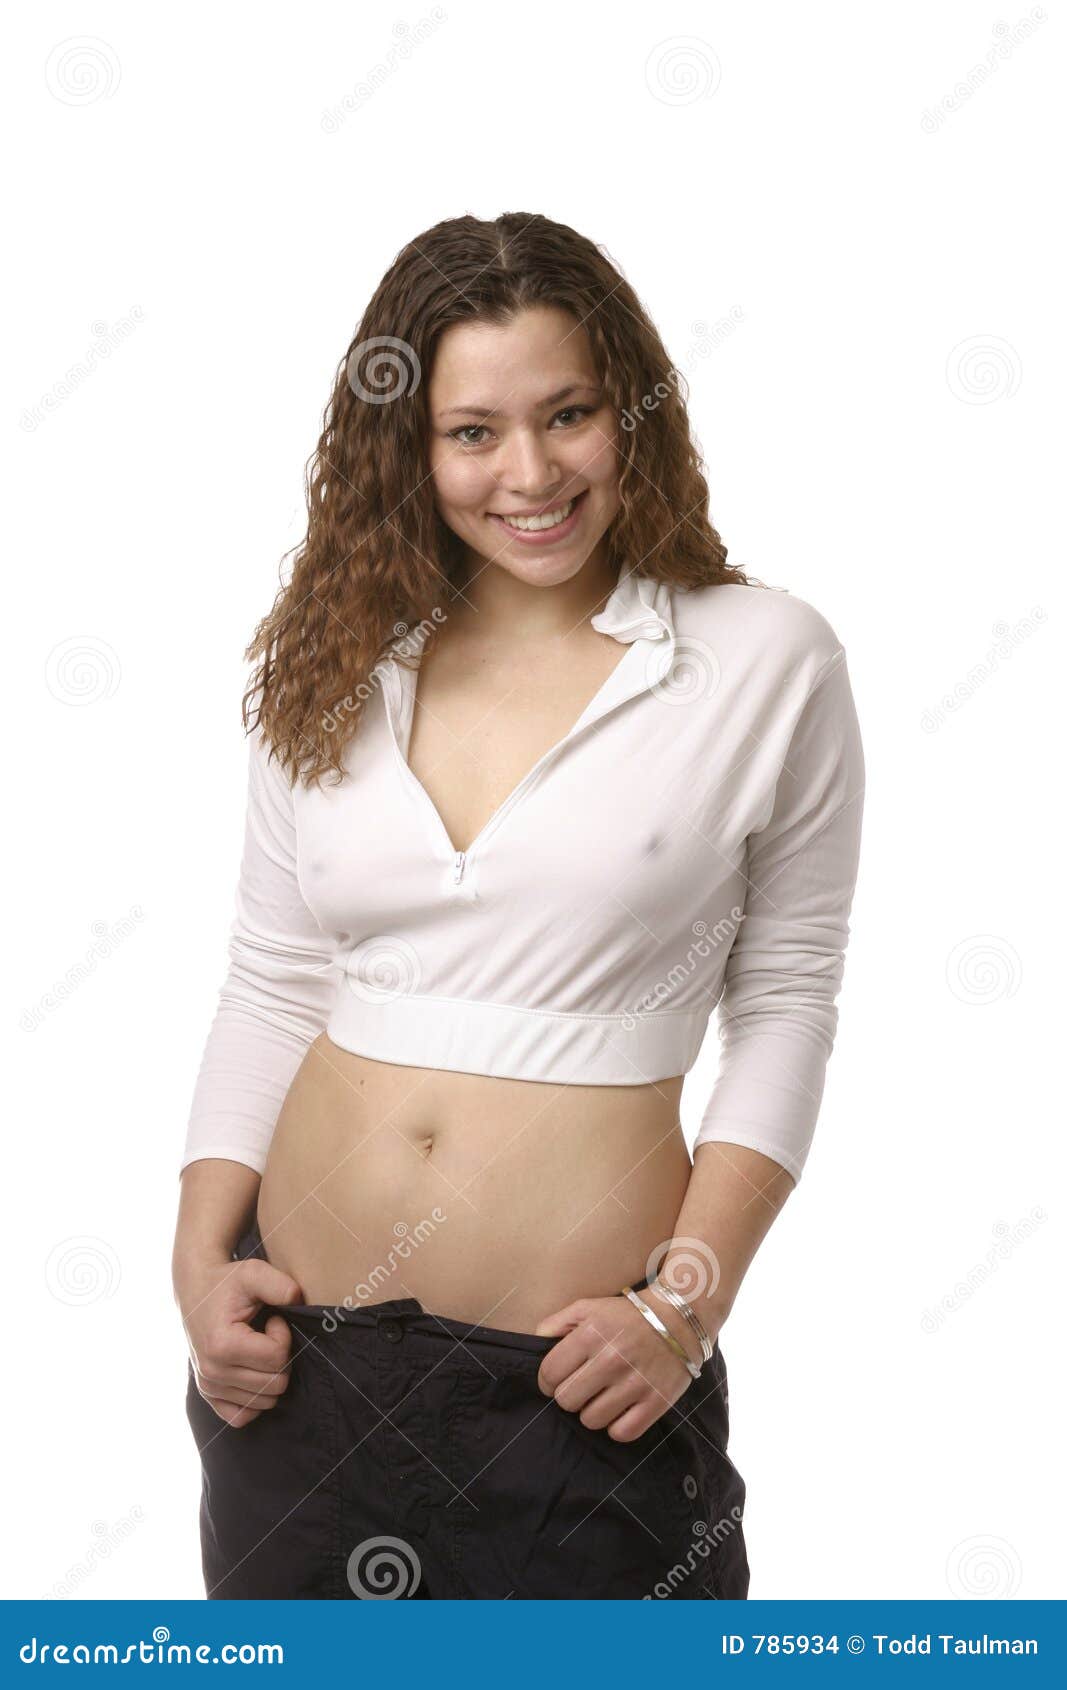 girl posing in short white shirt, showing belly button and wearing silver b...